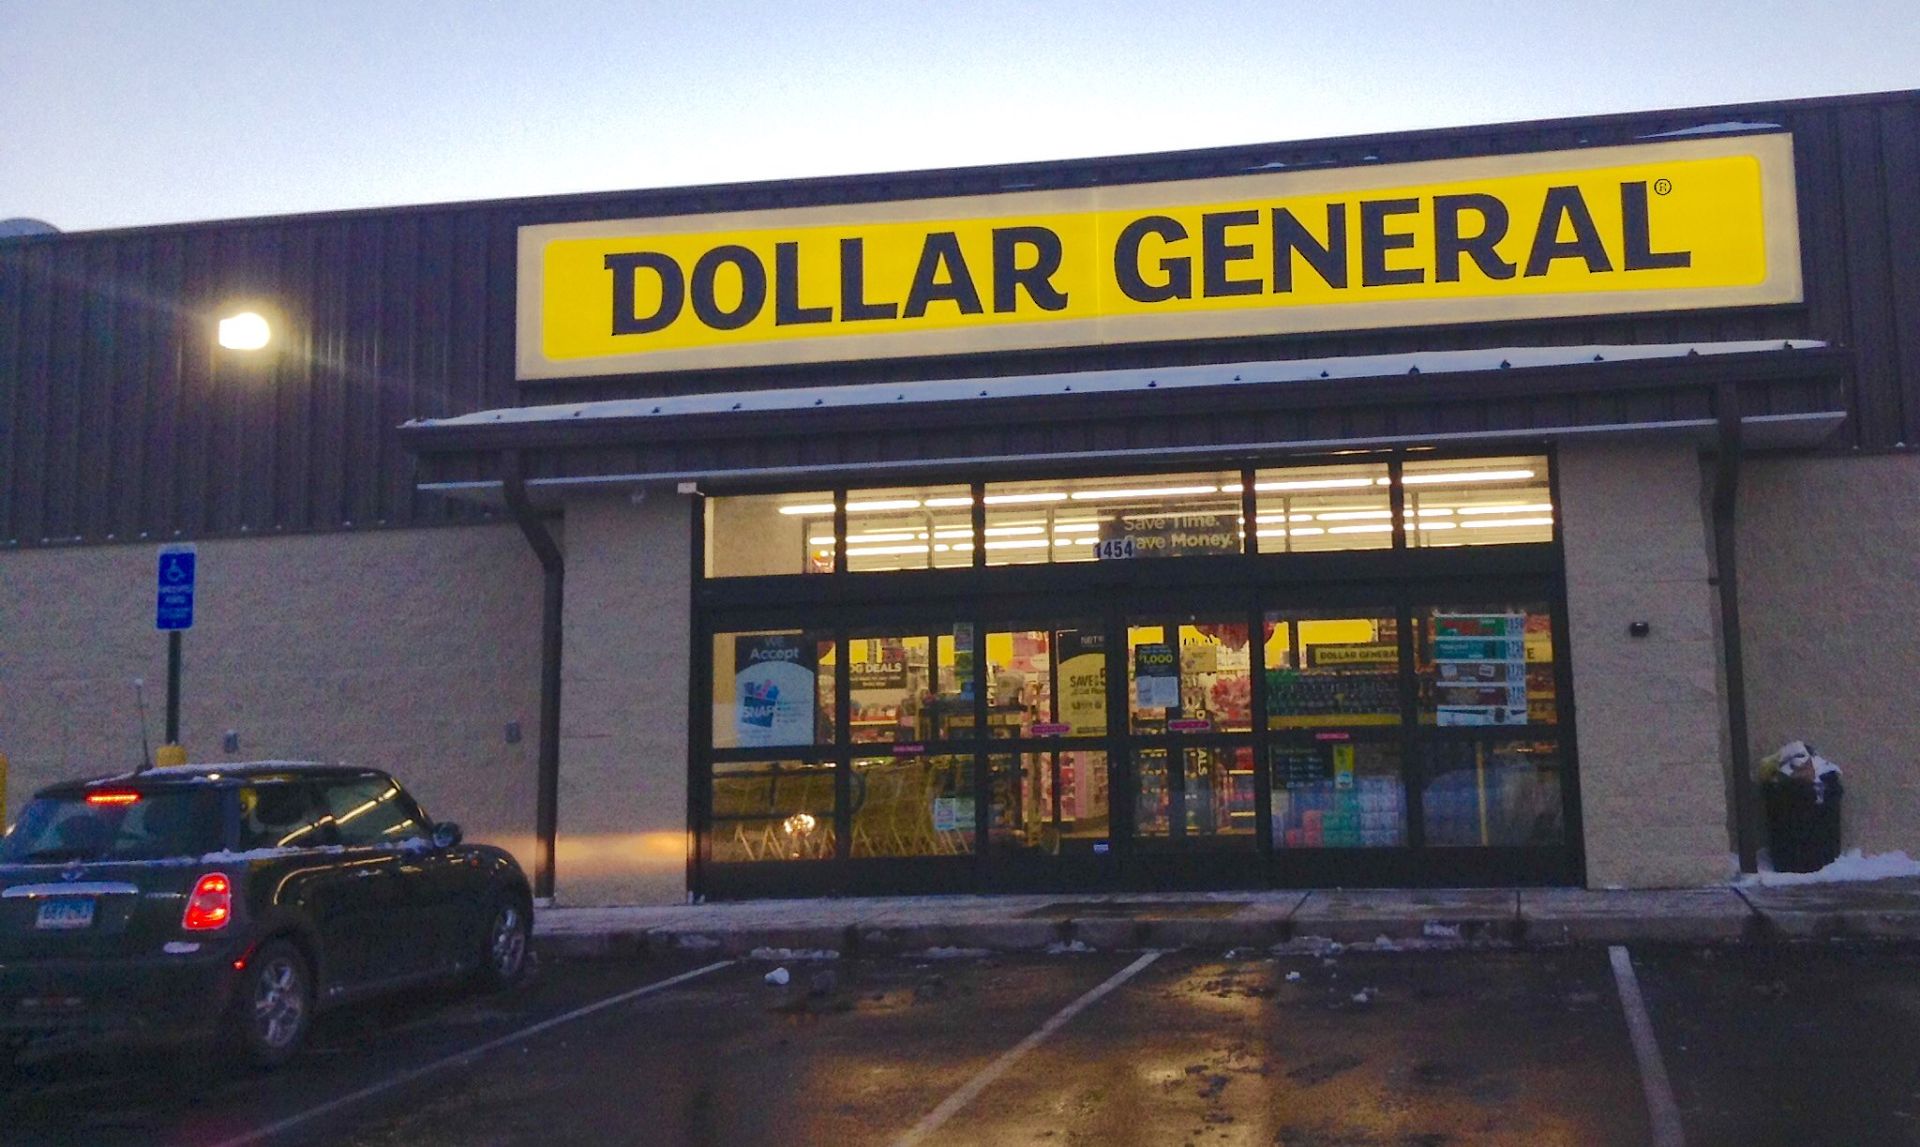 Dollar General aims to recruit thousands of candidates